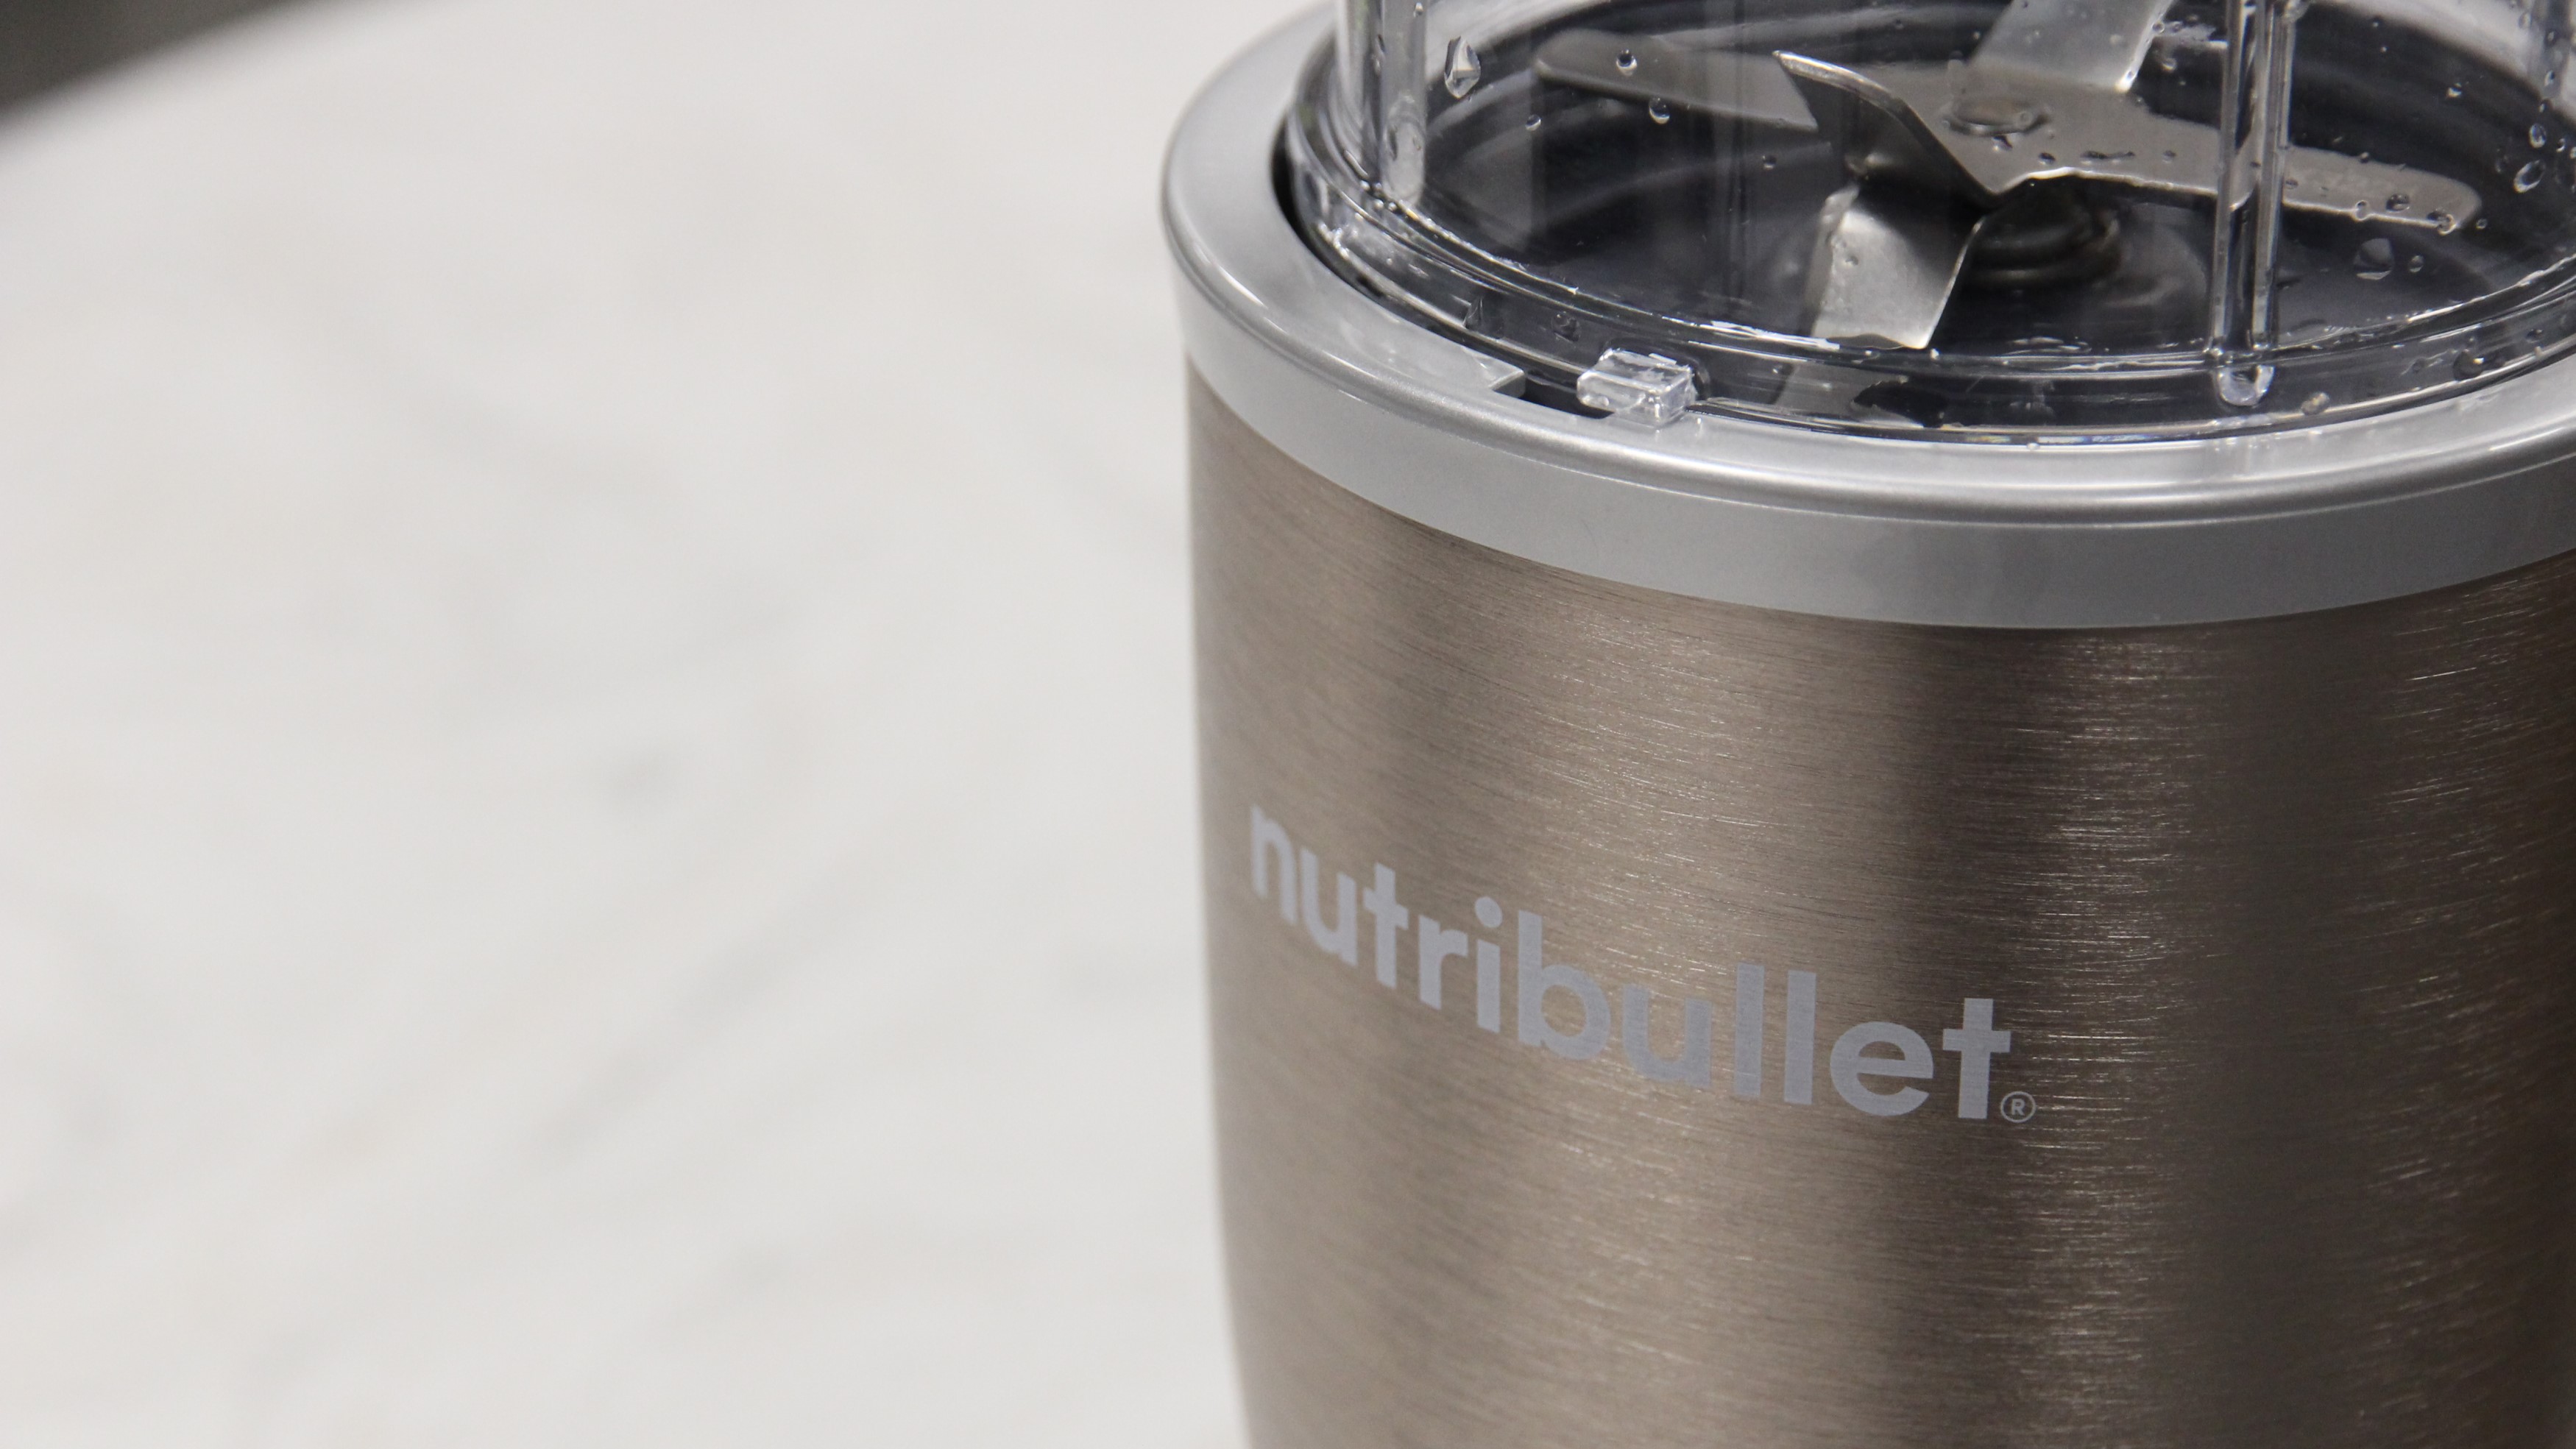 Kickstart a healthier lifestyle — The Nutribullet Pro is only $60